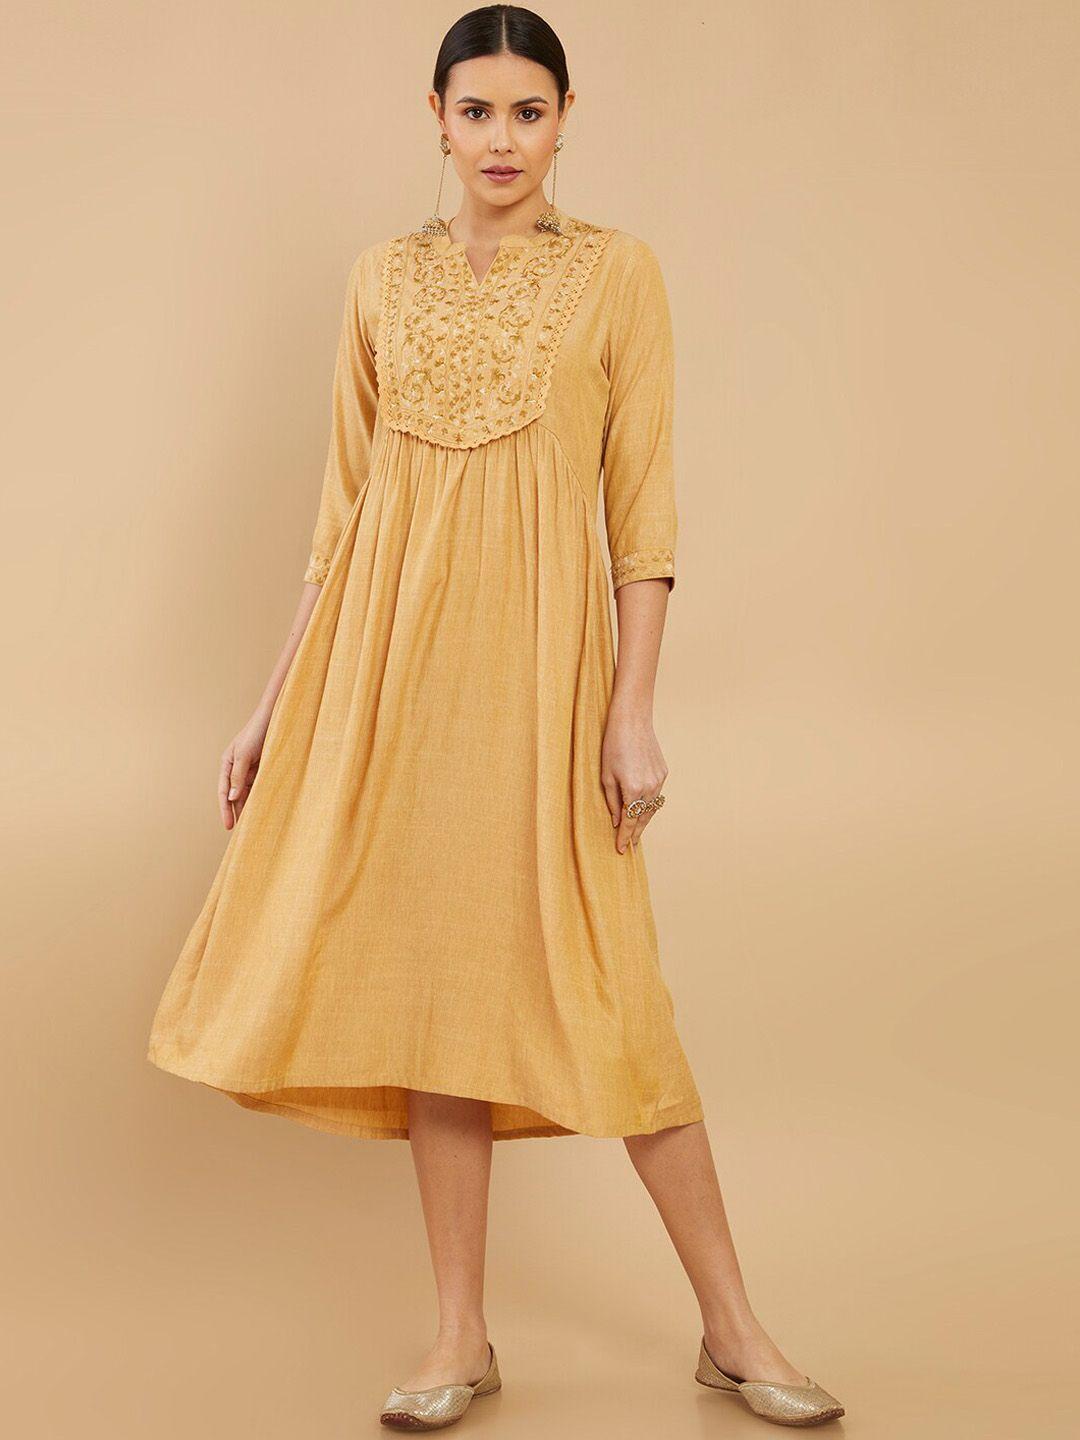 soch mustard yellow floral embroidered ethnic a-line dress